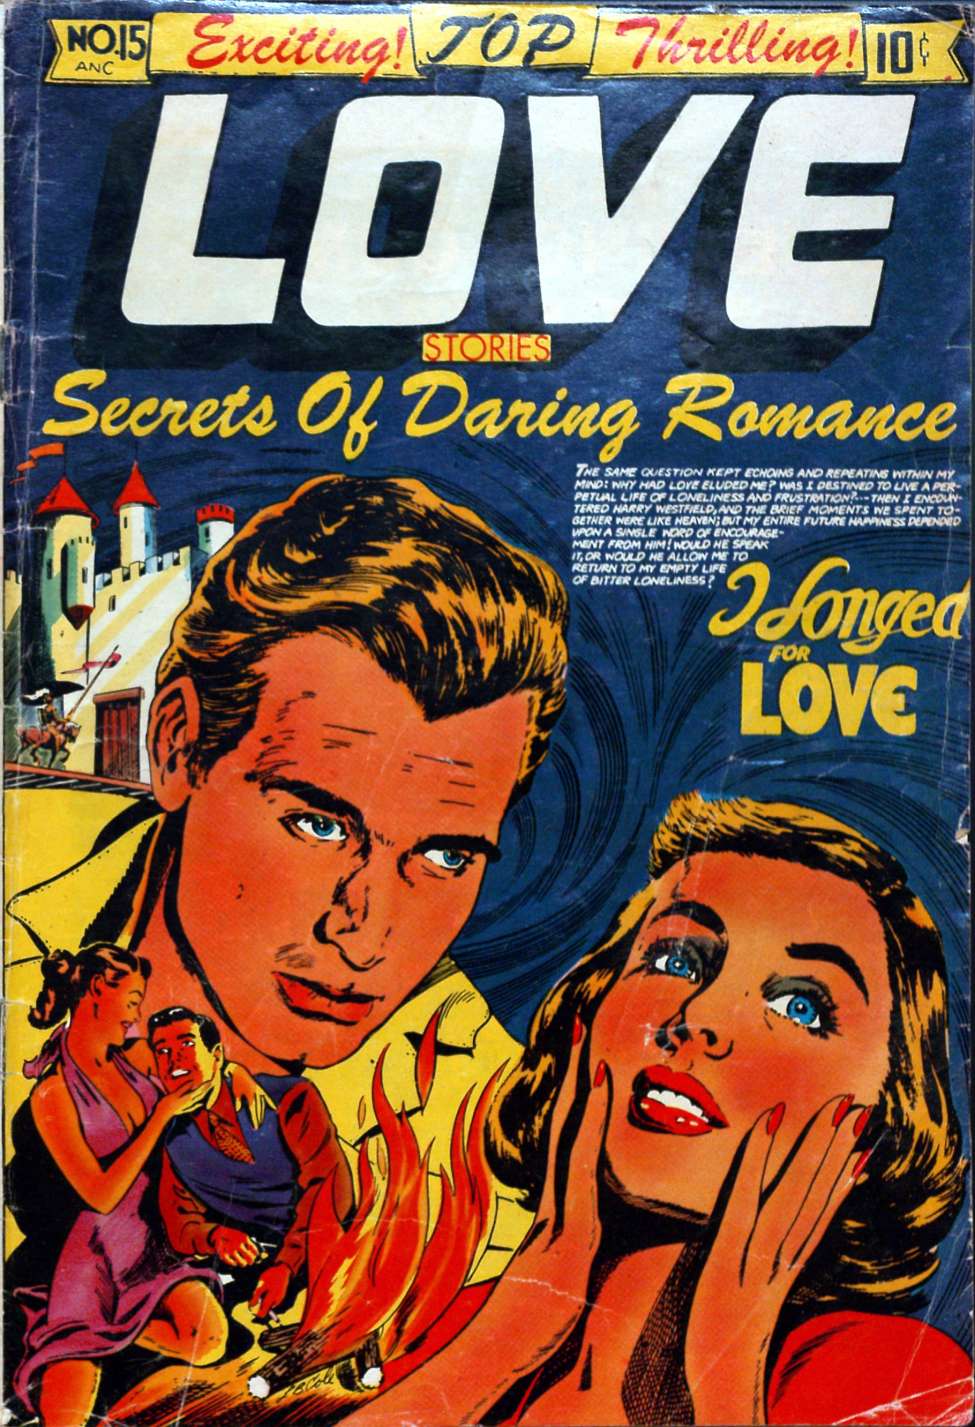 Book Cover For Top Love Stories 15